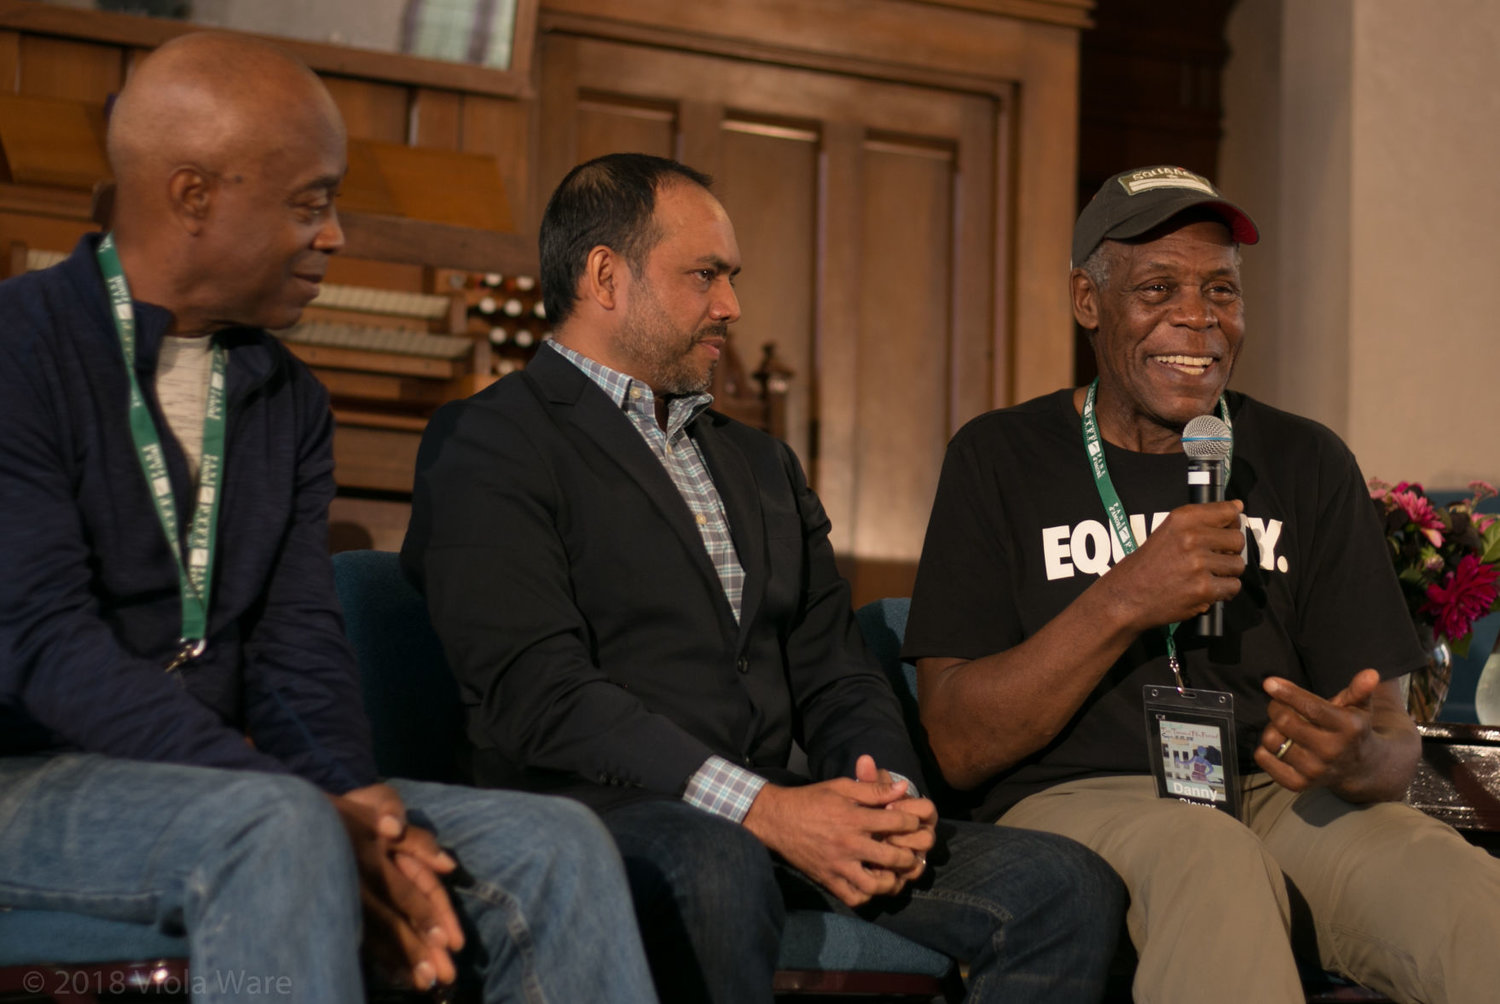 From left, filmmakers and change-makers Charles Burnett and Rais Bhuiyan listen to actor, activist and Port Townsend Film Festival’s special guest Danny Glover speak about his upbringing during a community conversation event. 